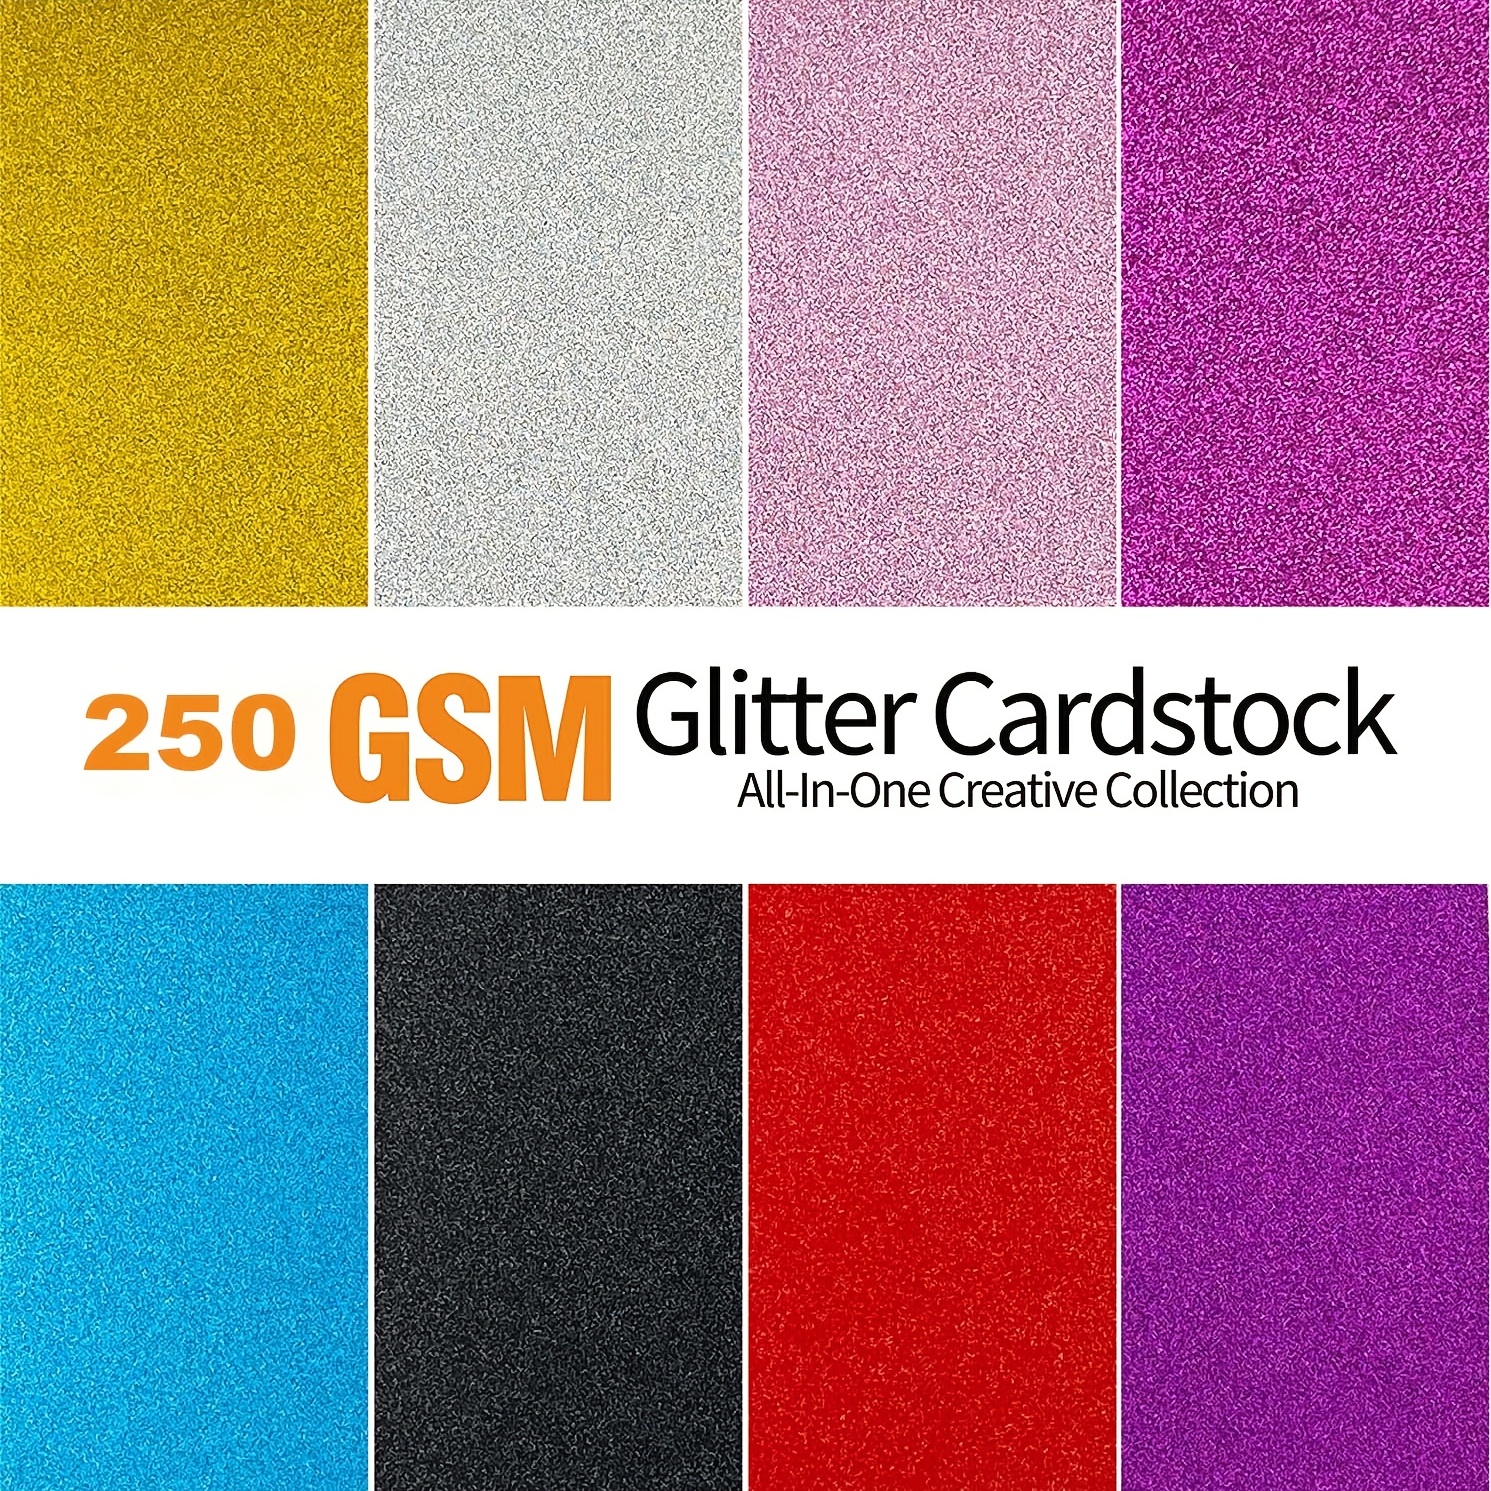 VGOODALL Glitter Paper Cardstock,20 Sheets Silver Gold Glitter Cardstock A4 Size 250gms Craft Paper Christmas Cardstock Christmas Gift Wrapping for